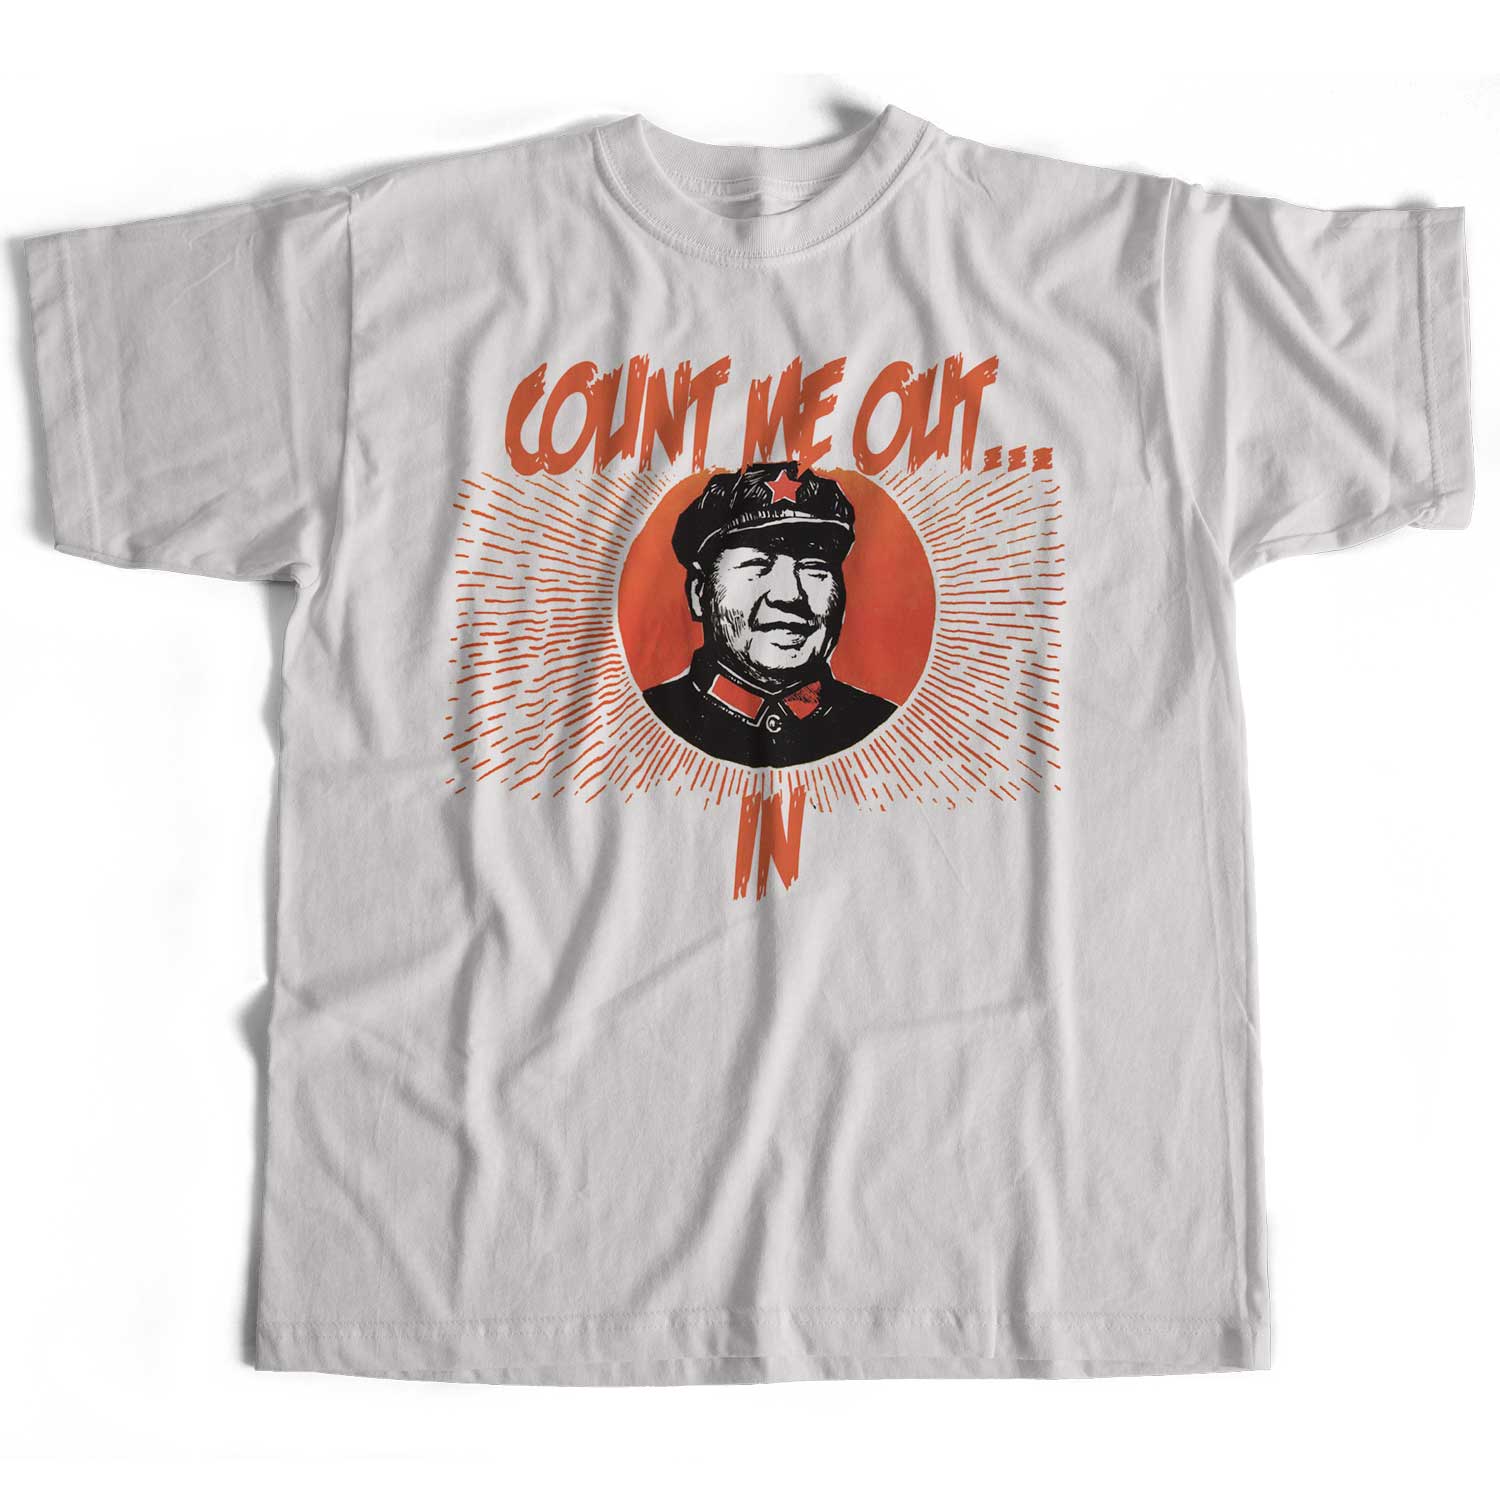 Old Skool Hooligans Inspired by The Fab Four T Shirt - Chairman Mao Revolution Count Me Out